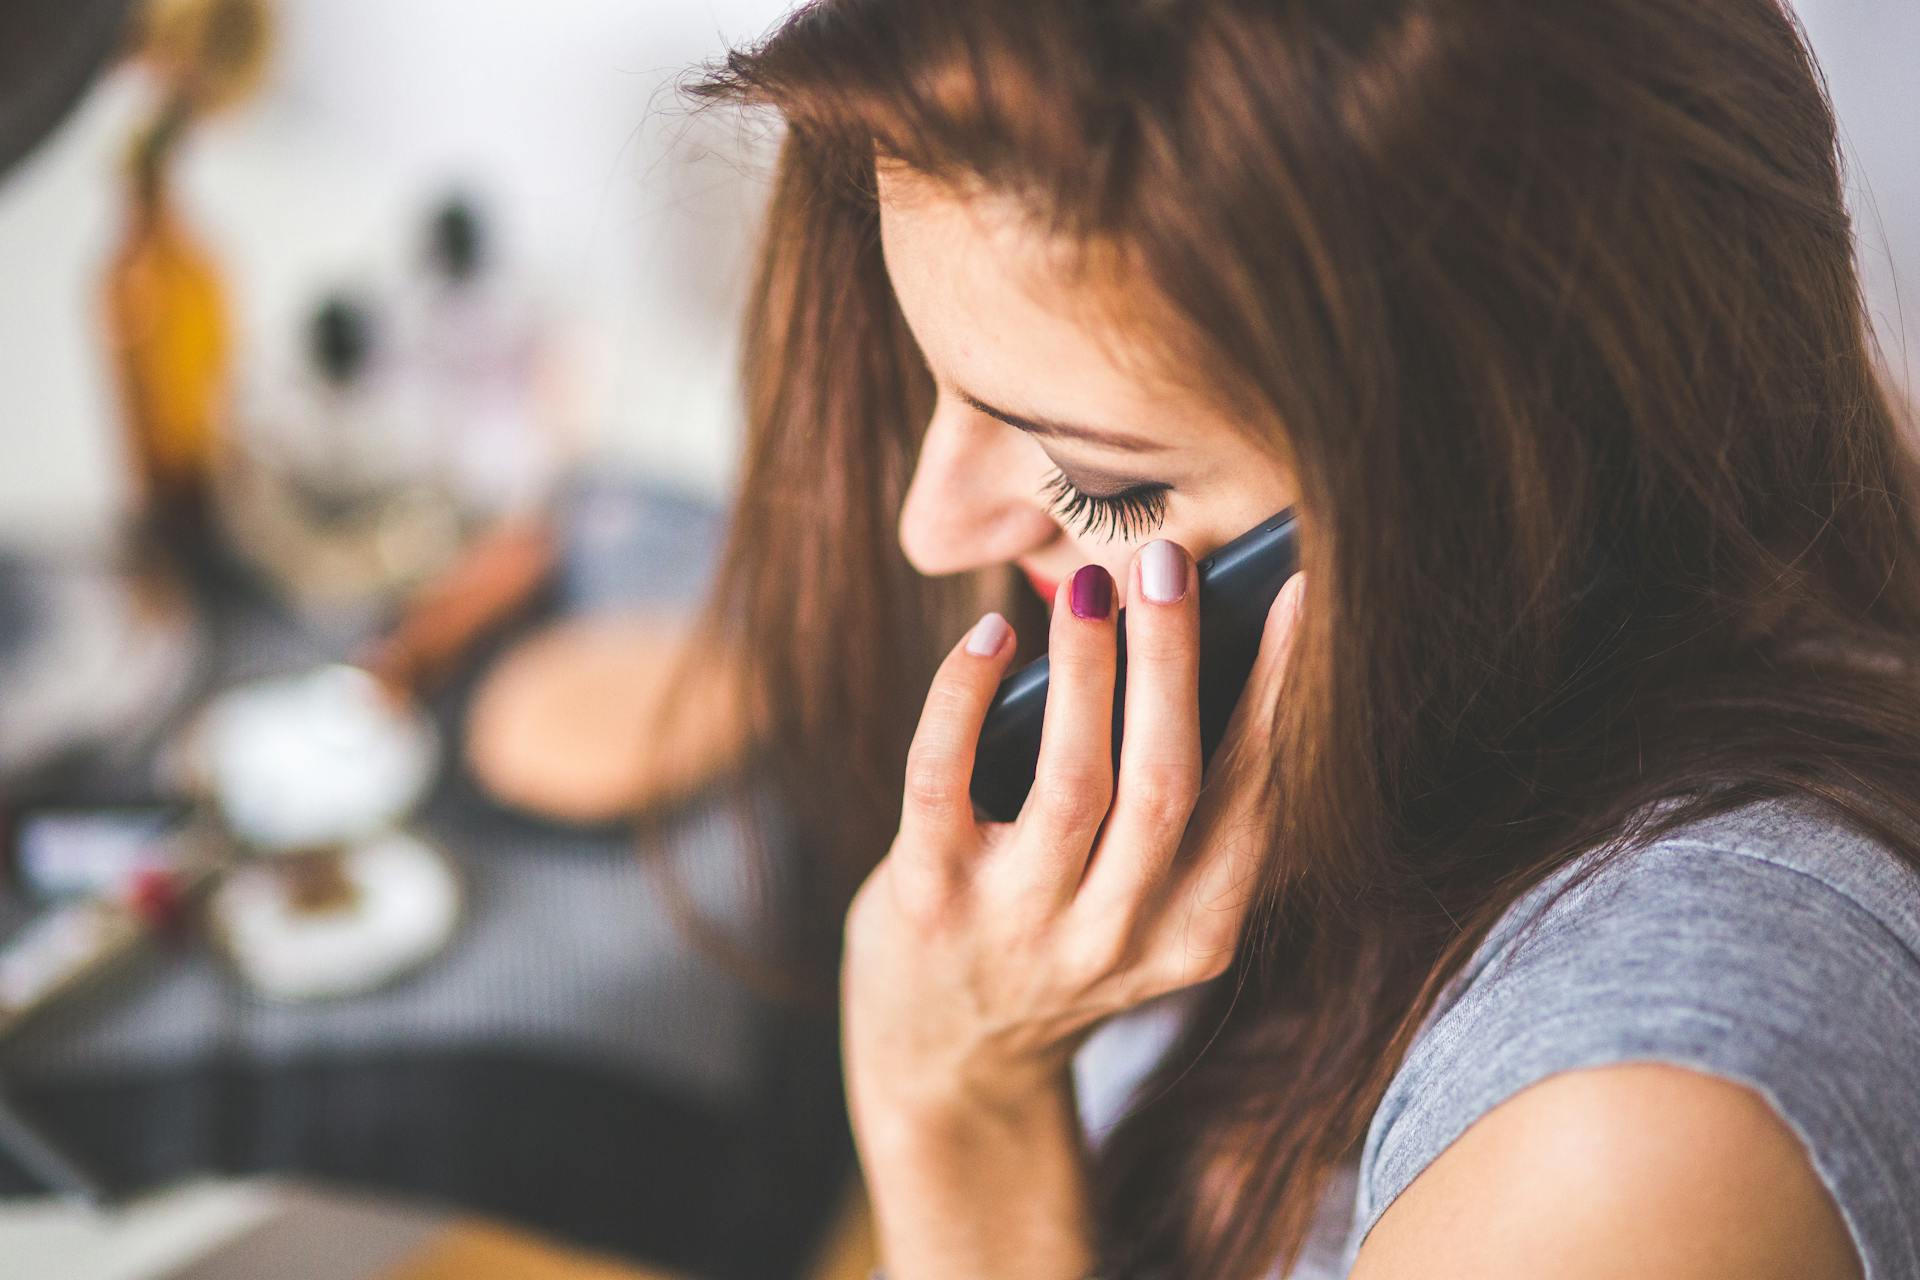 A woman on the phone | Source: Pexels